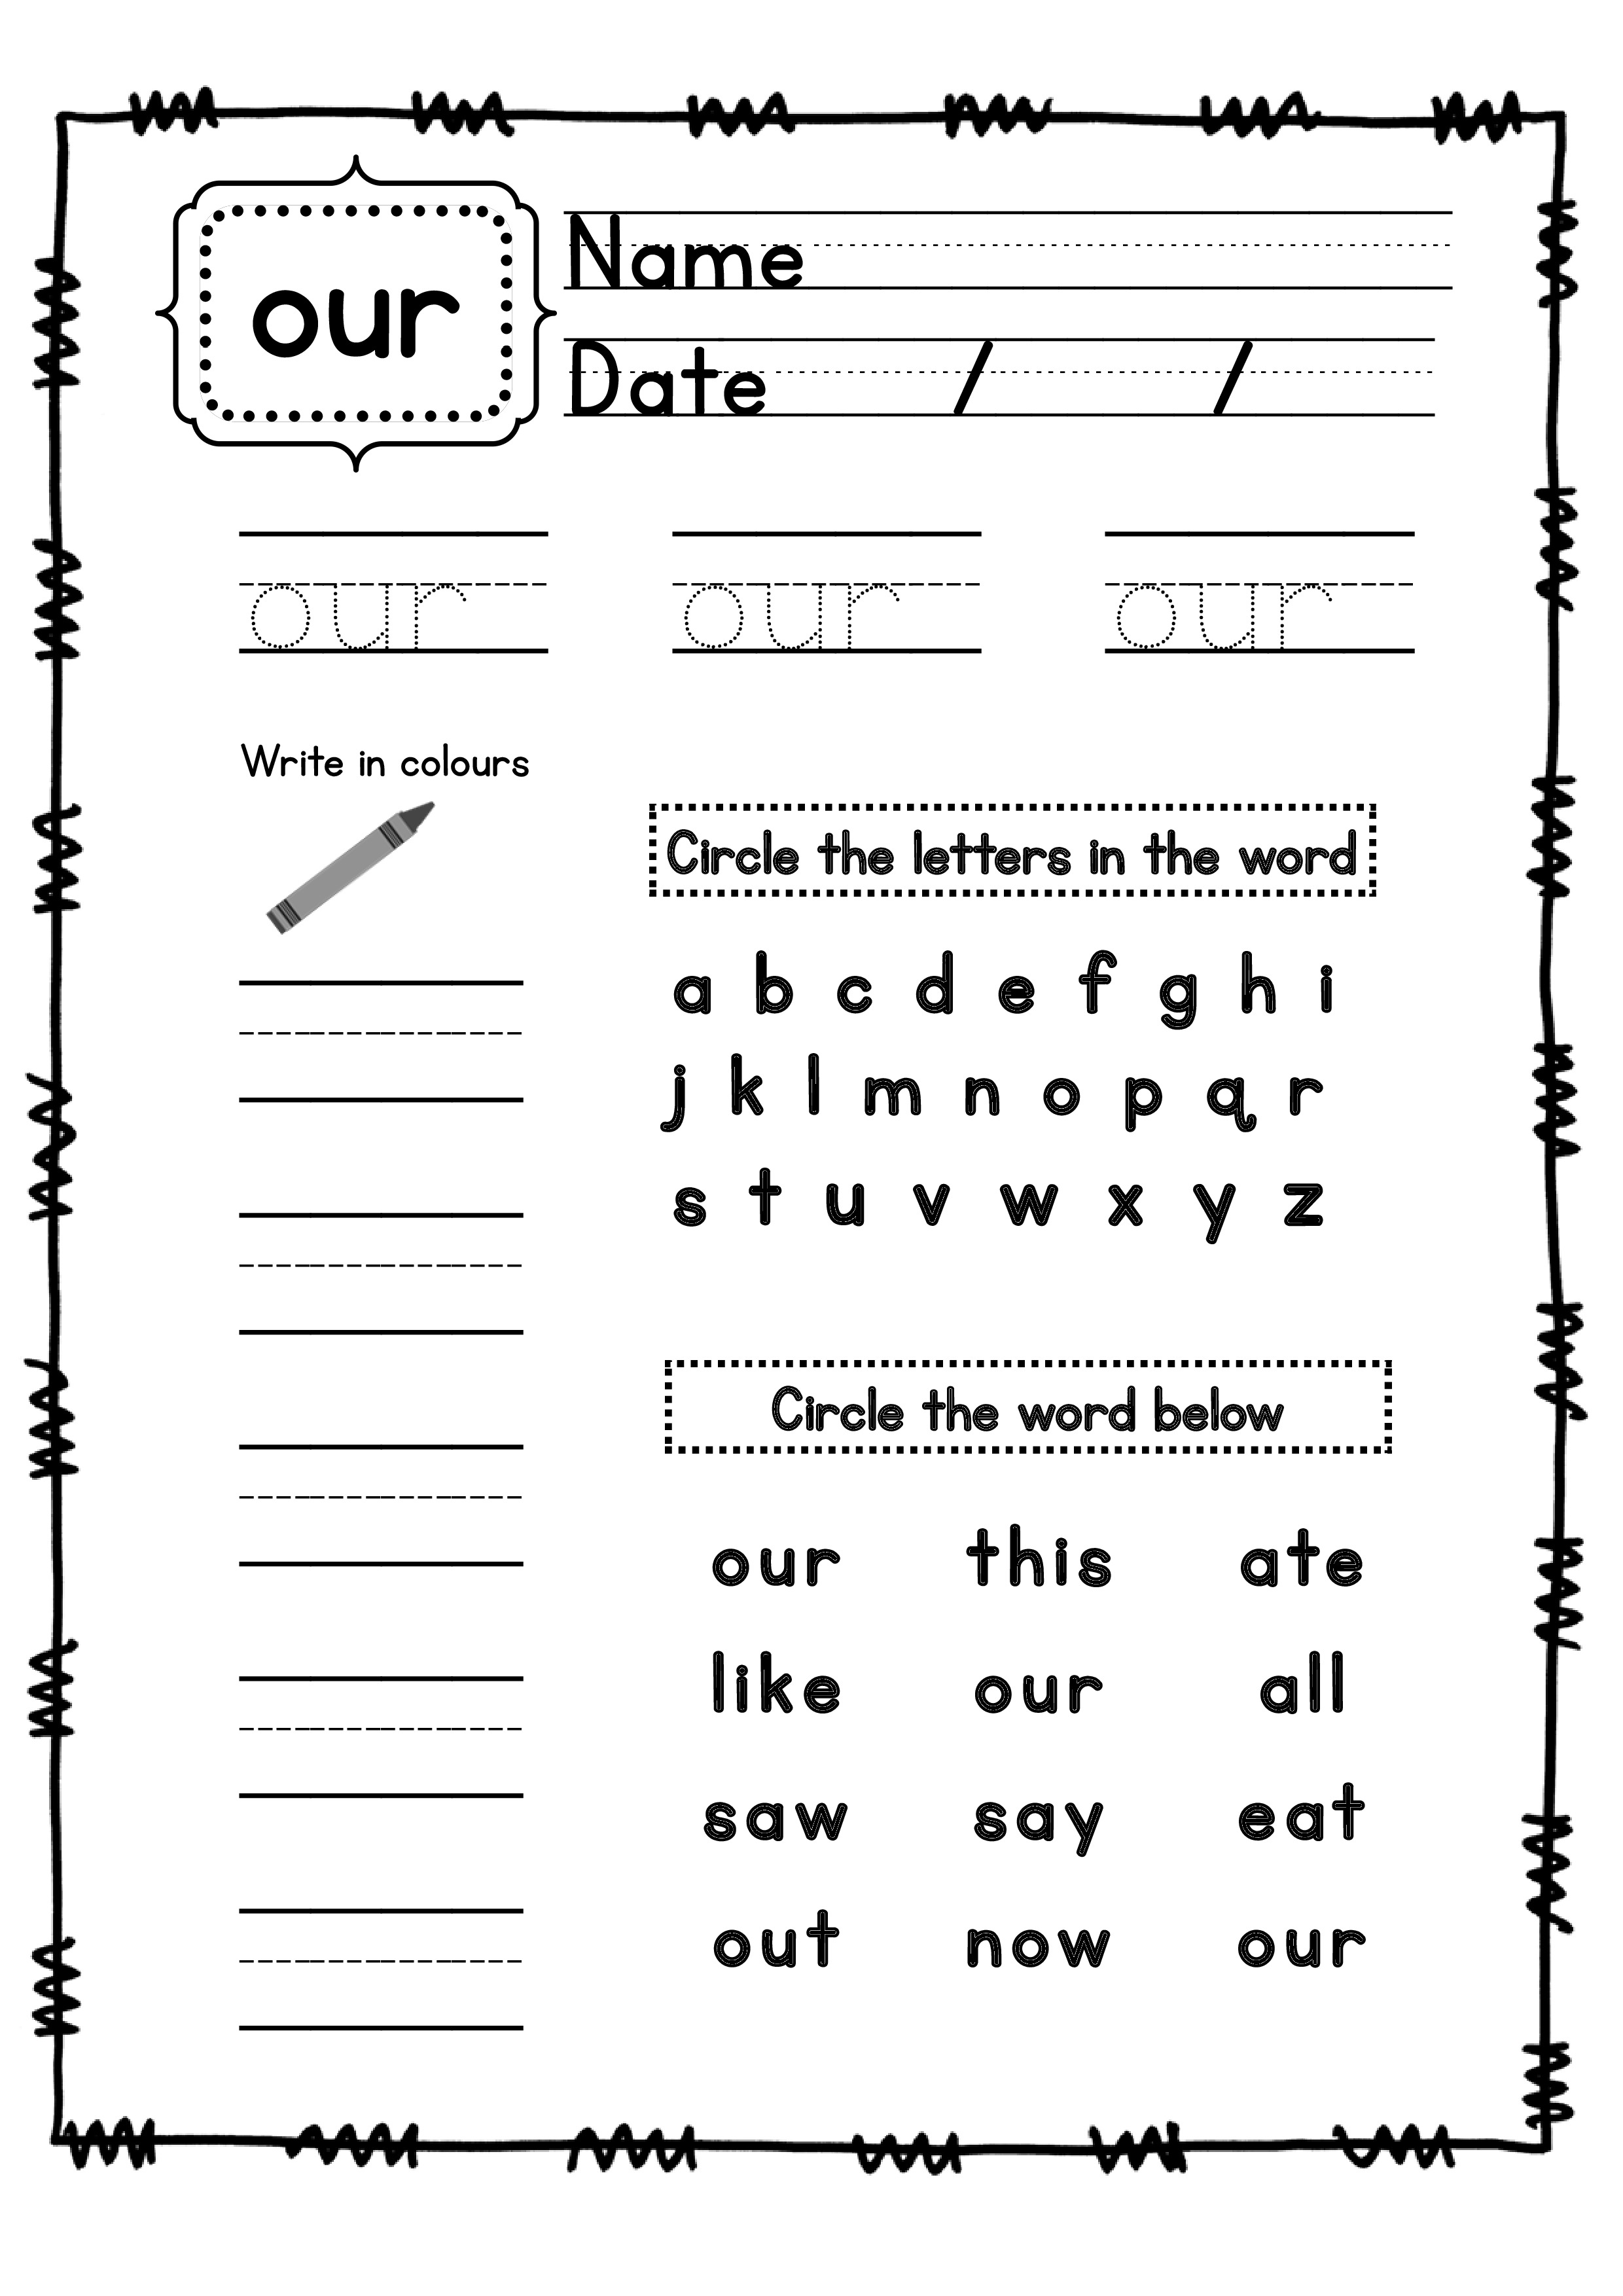 52 in worksheets word the sight pdf includes fill all the worksheets primer words on sight word  word